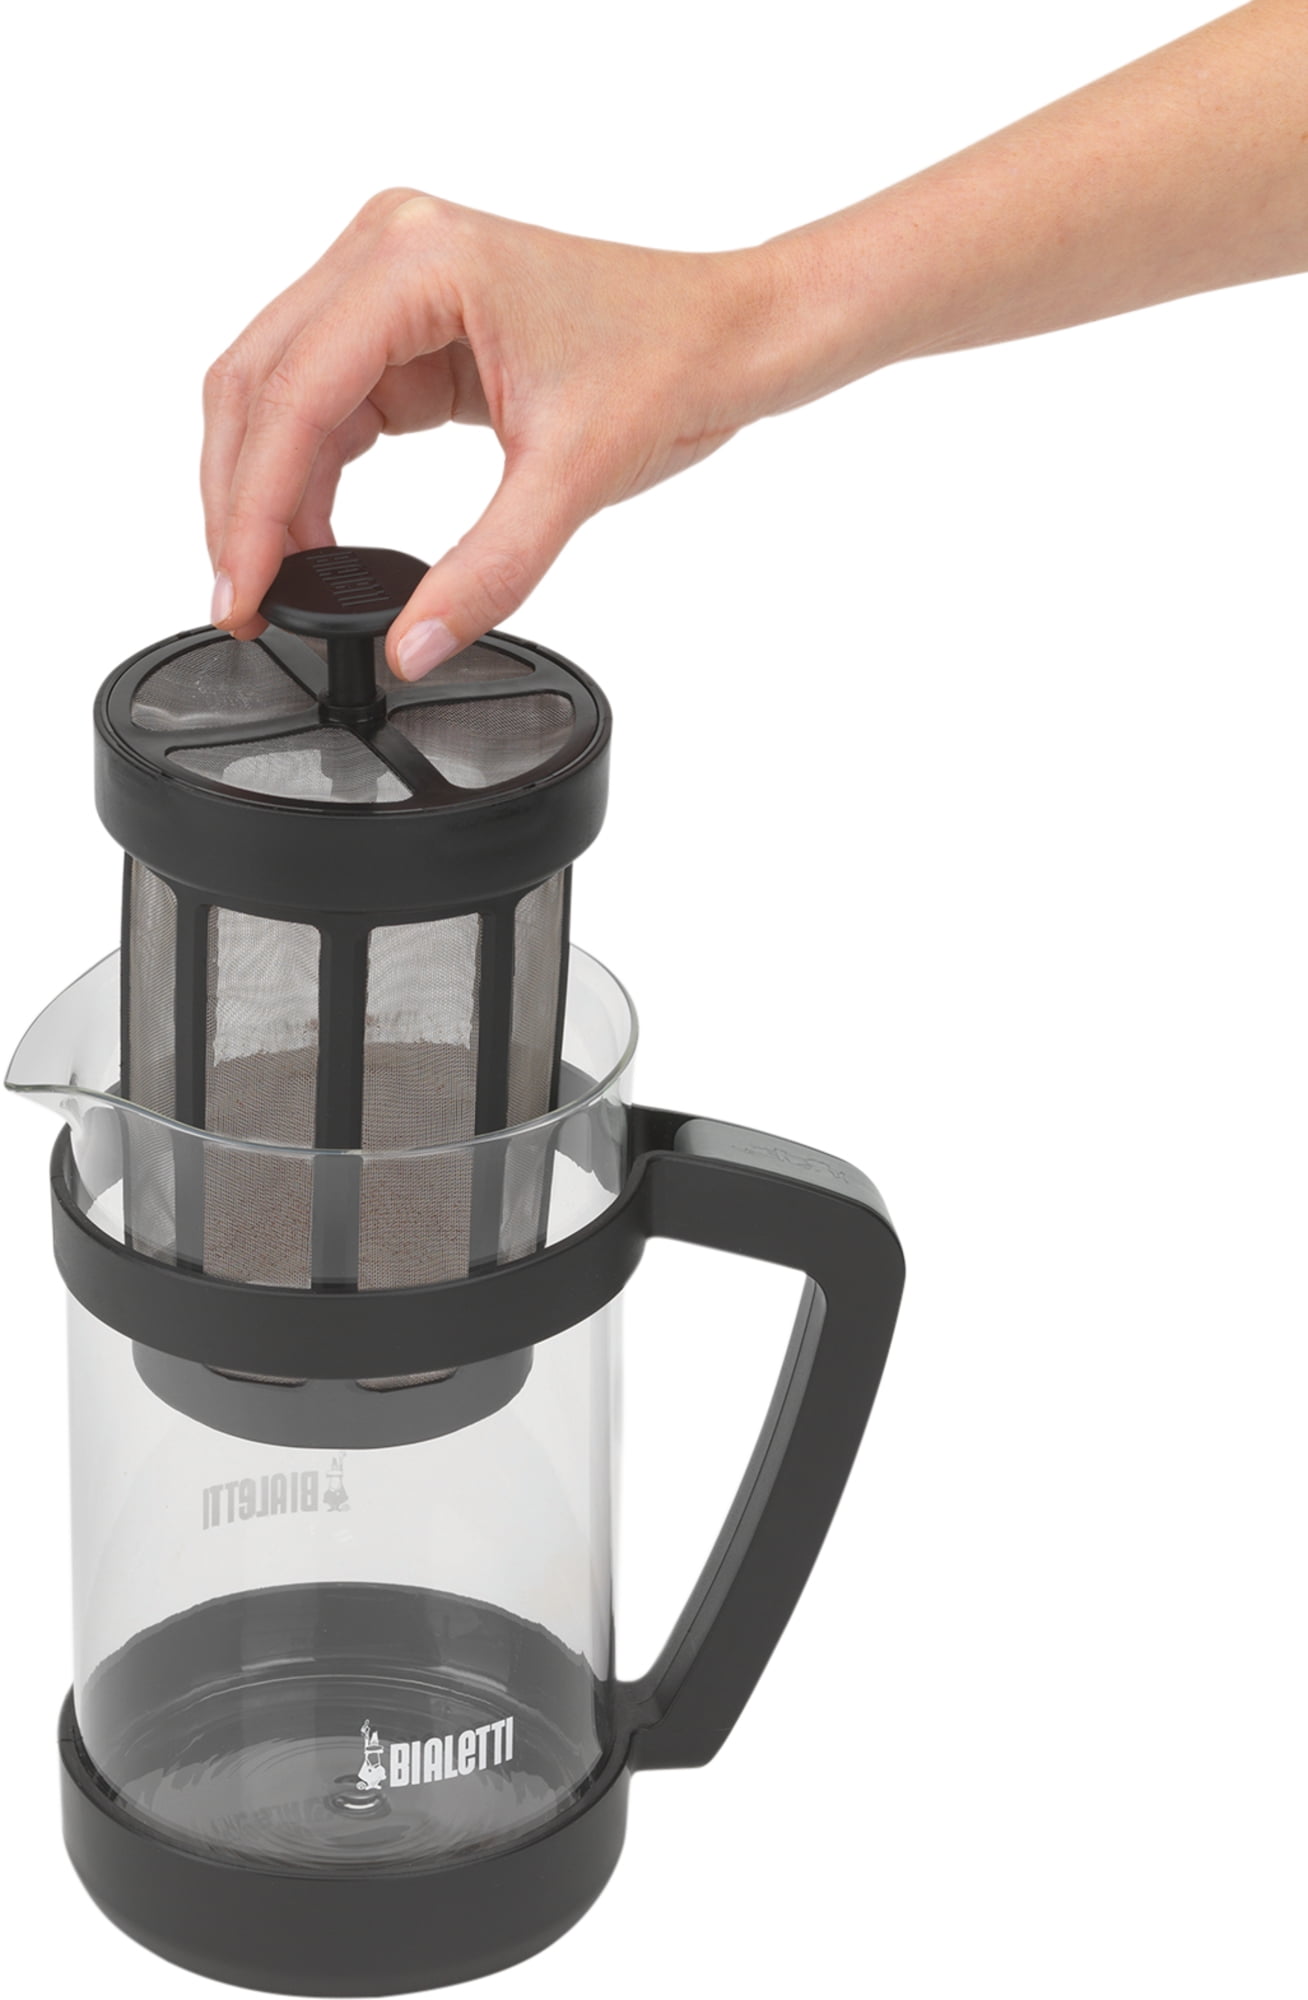 Bialetti Cold Brew Coffee Maker review: Bialetti's pitcher makes powerful  cold brew in your fridge - CNET